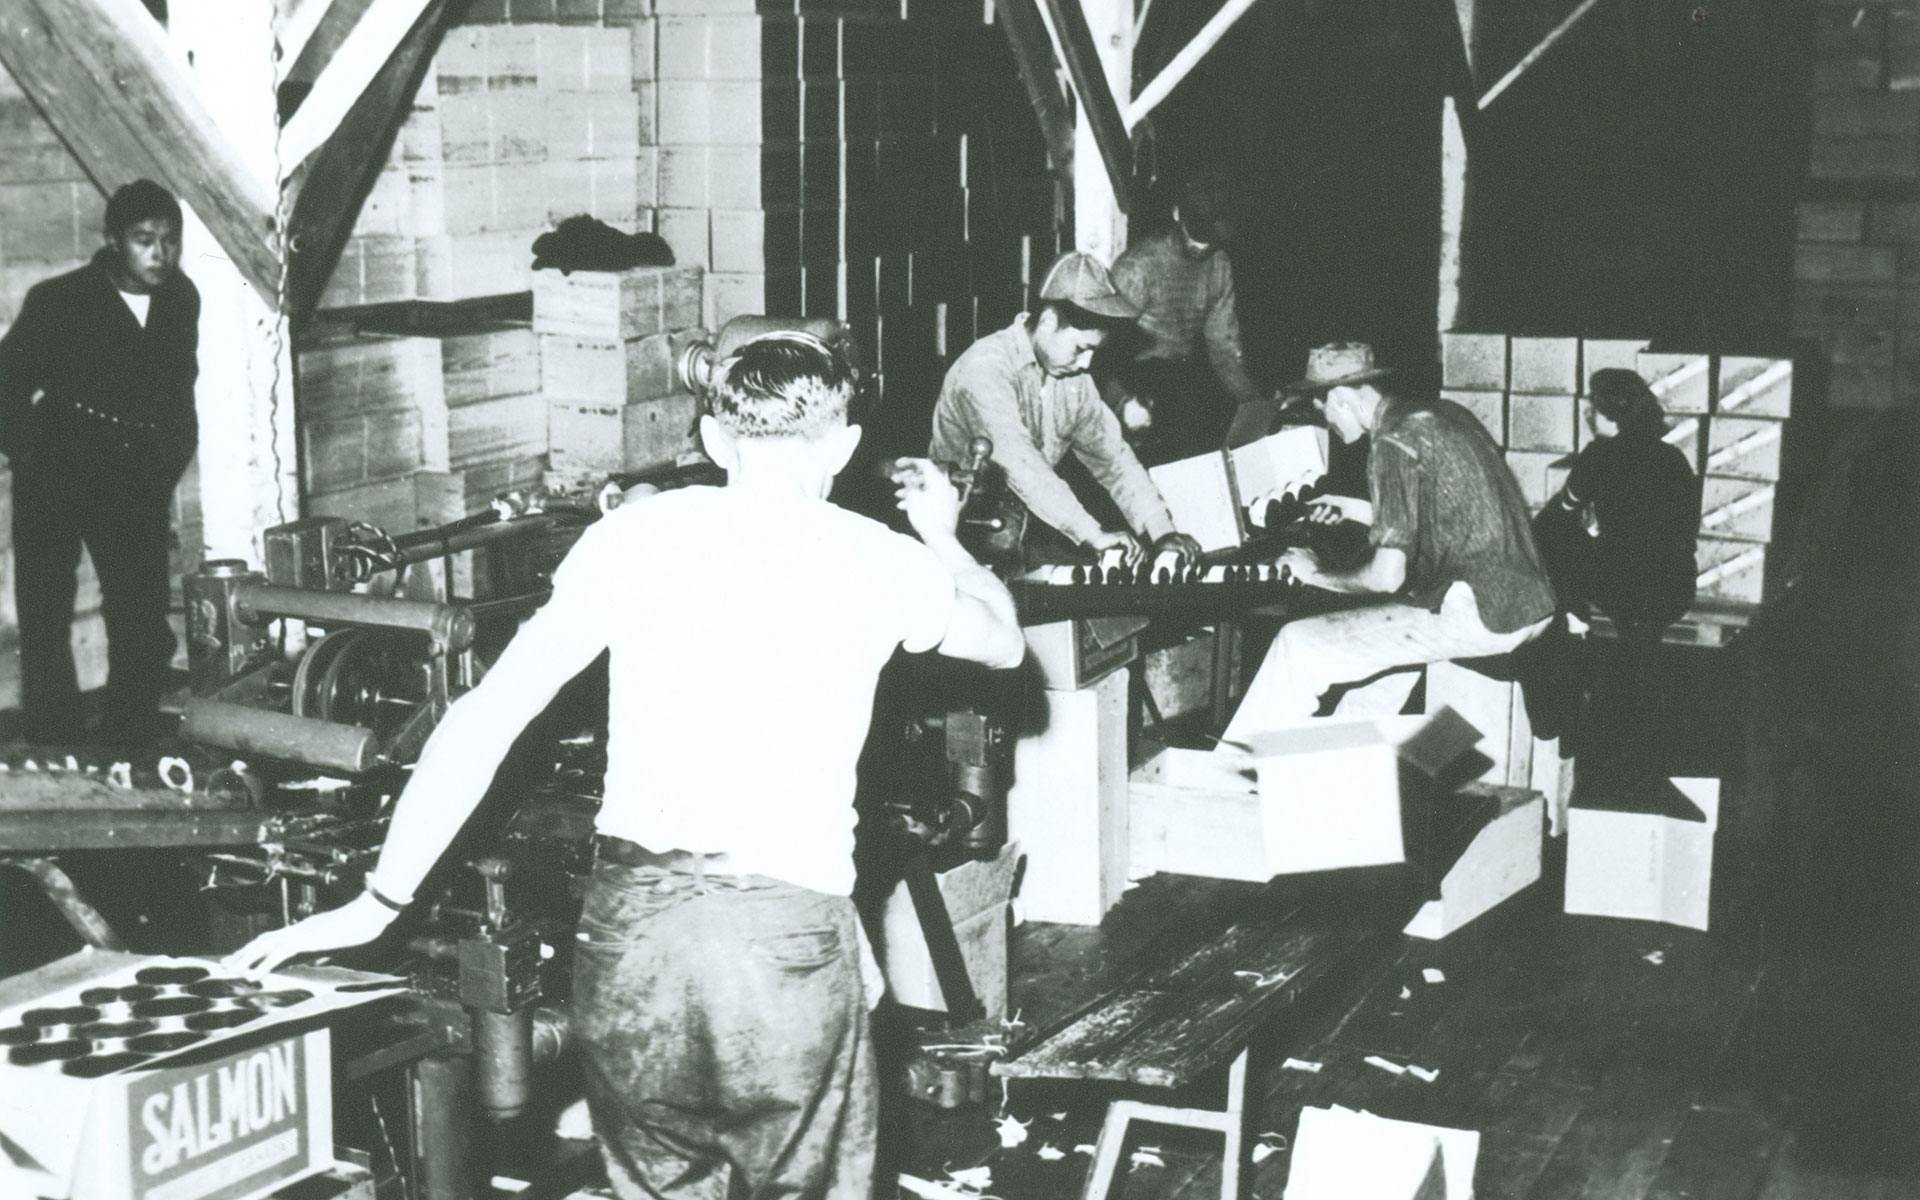 Six workers and labeling machine at the North Pacific Cannery. One box in the foreground bears the label "Salmon."